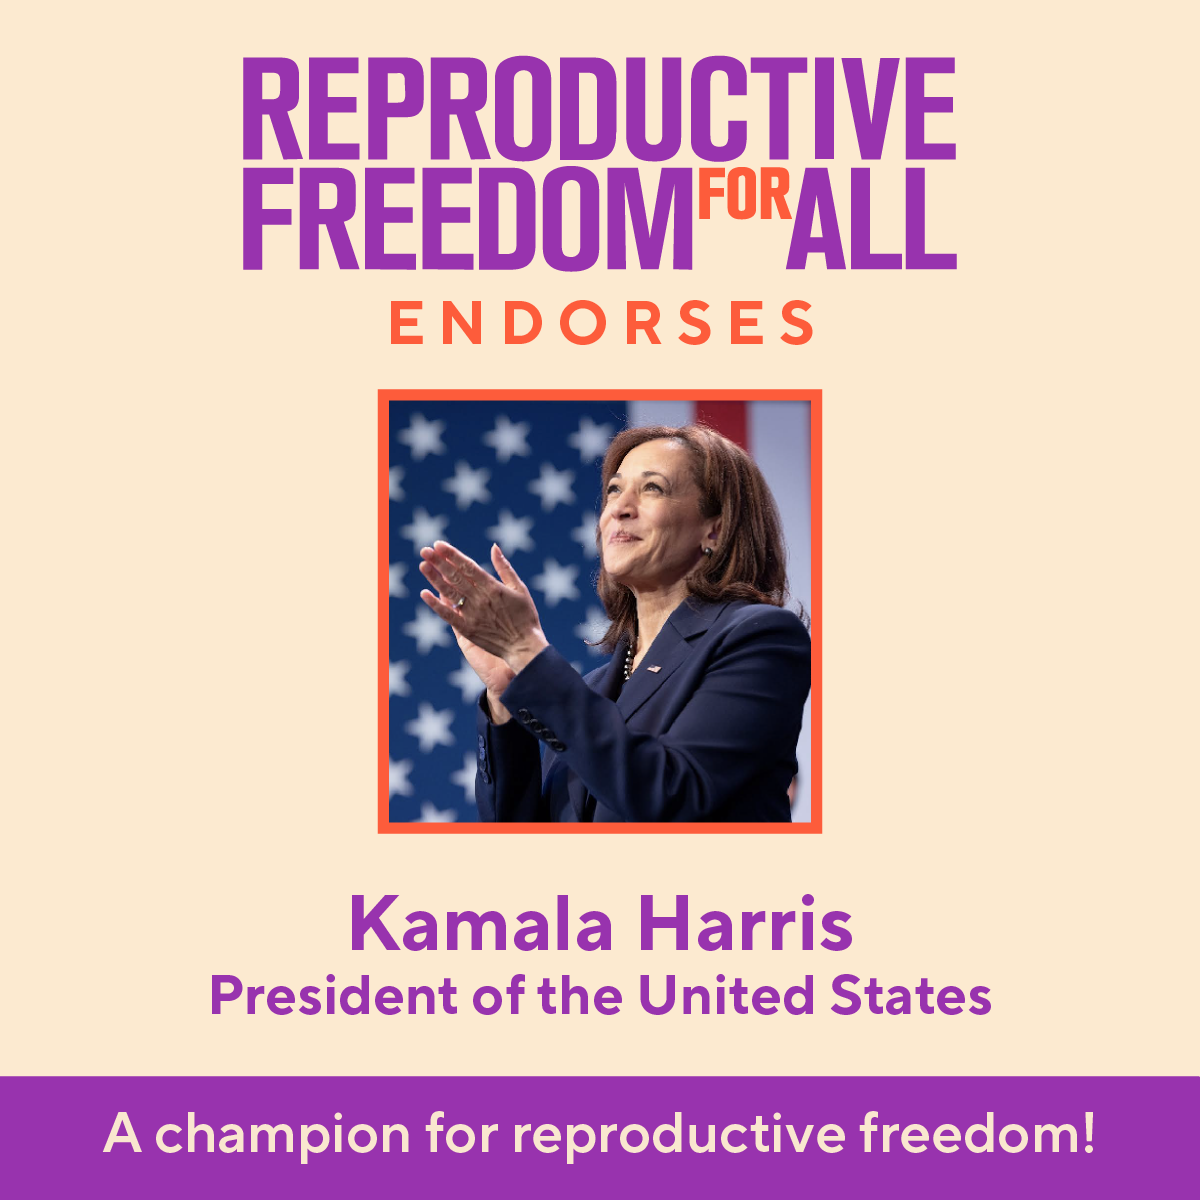 Kamala Harris endorsed U.S. Presidential candidate by Reproductive Freedom for All